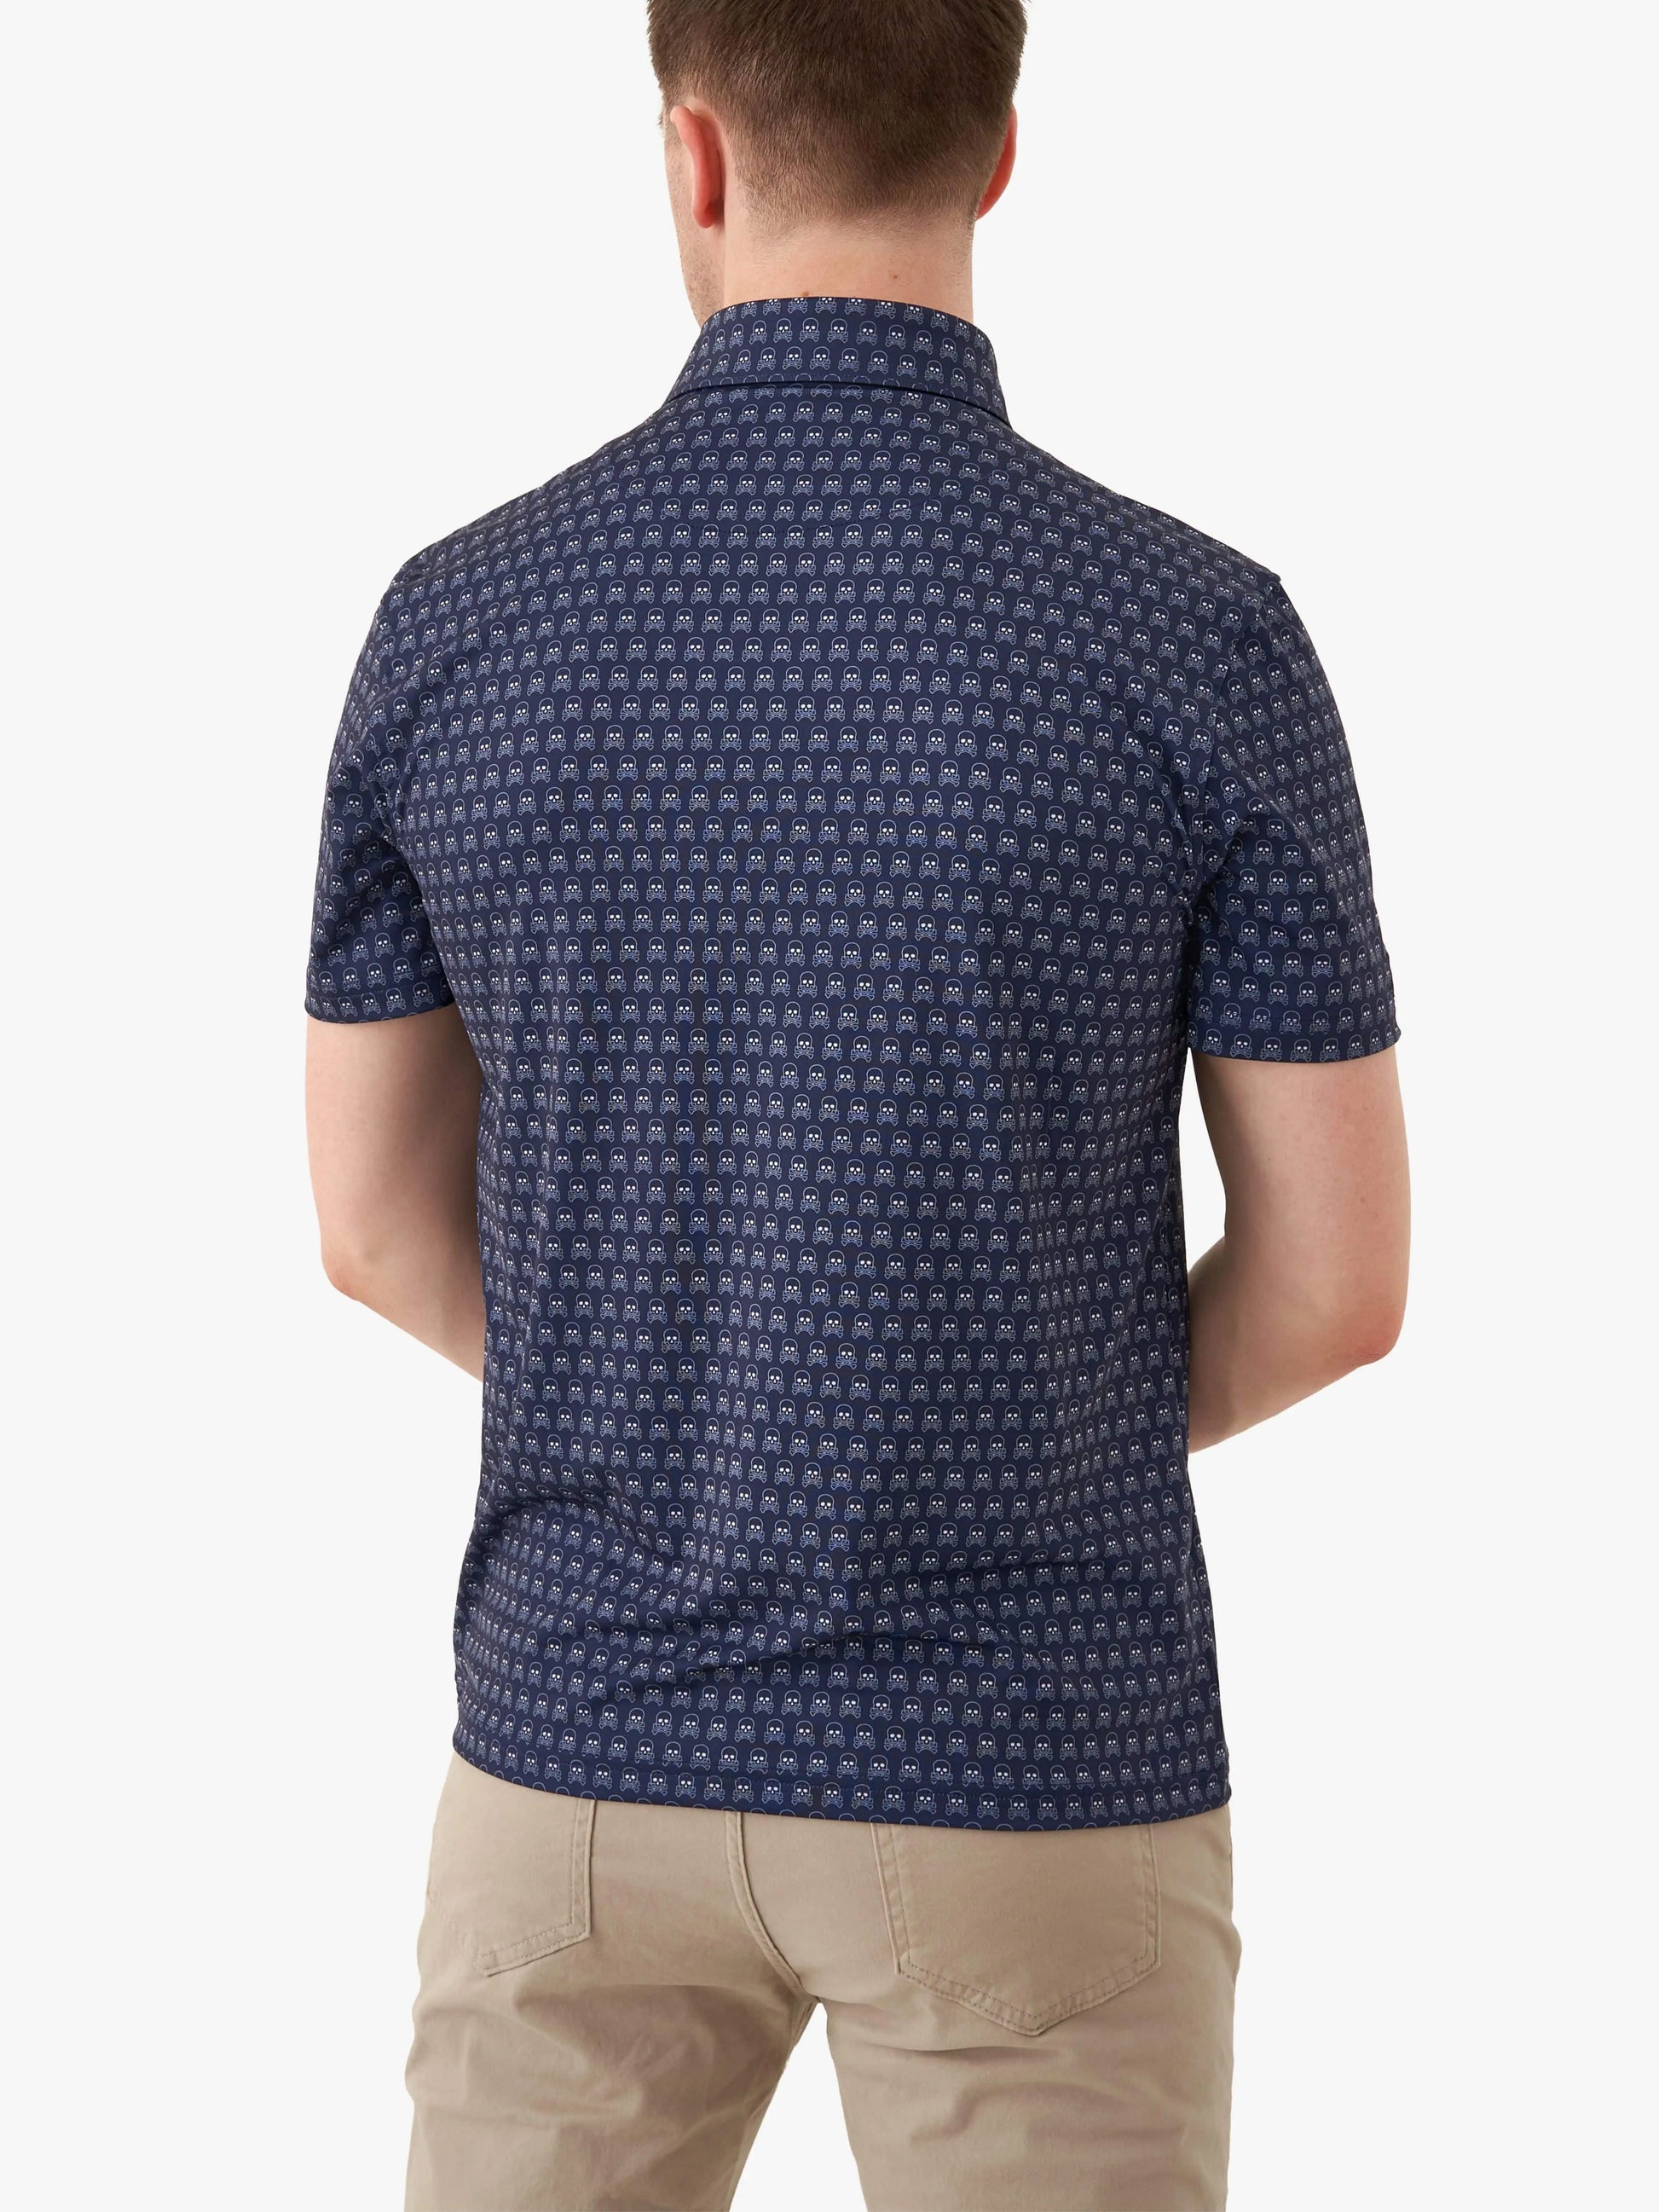 navy golf polo with skull design